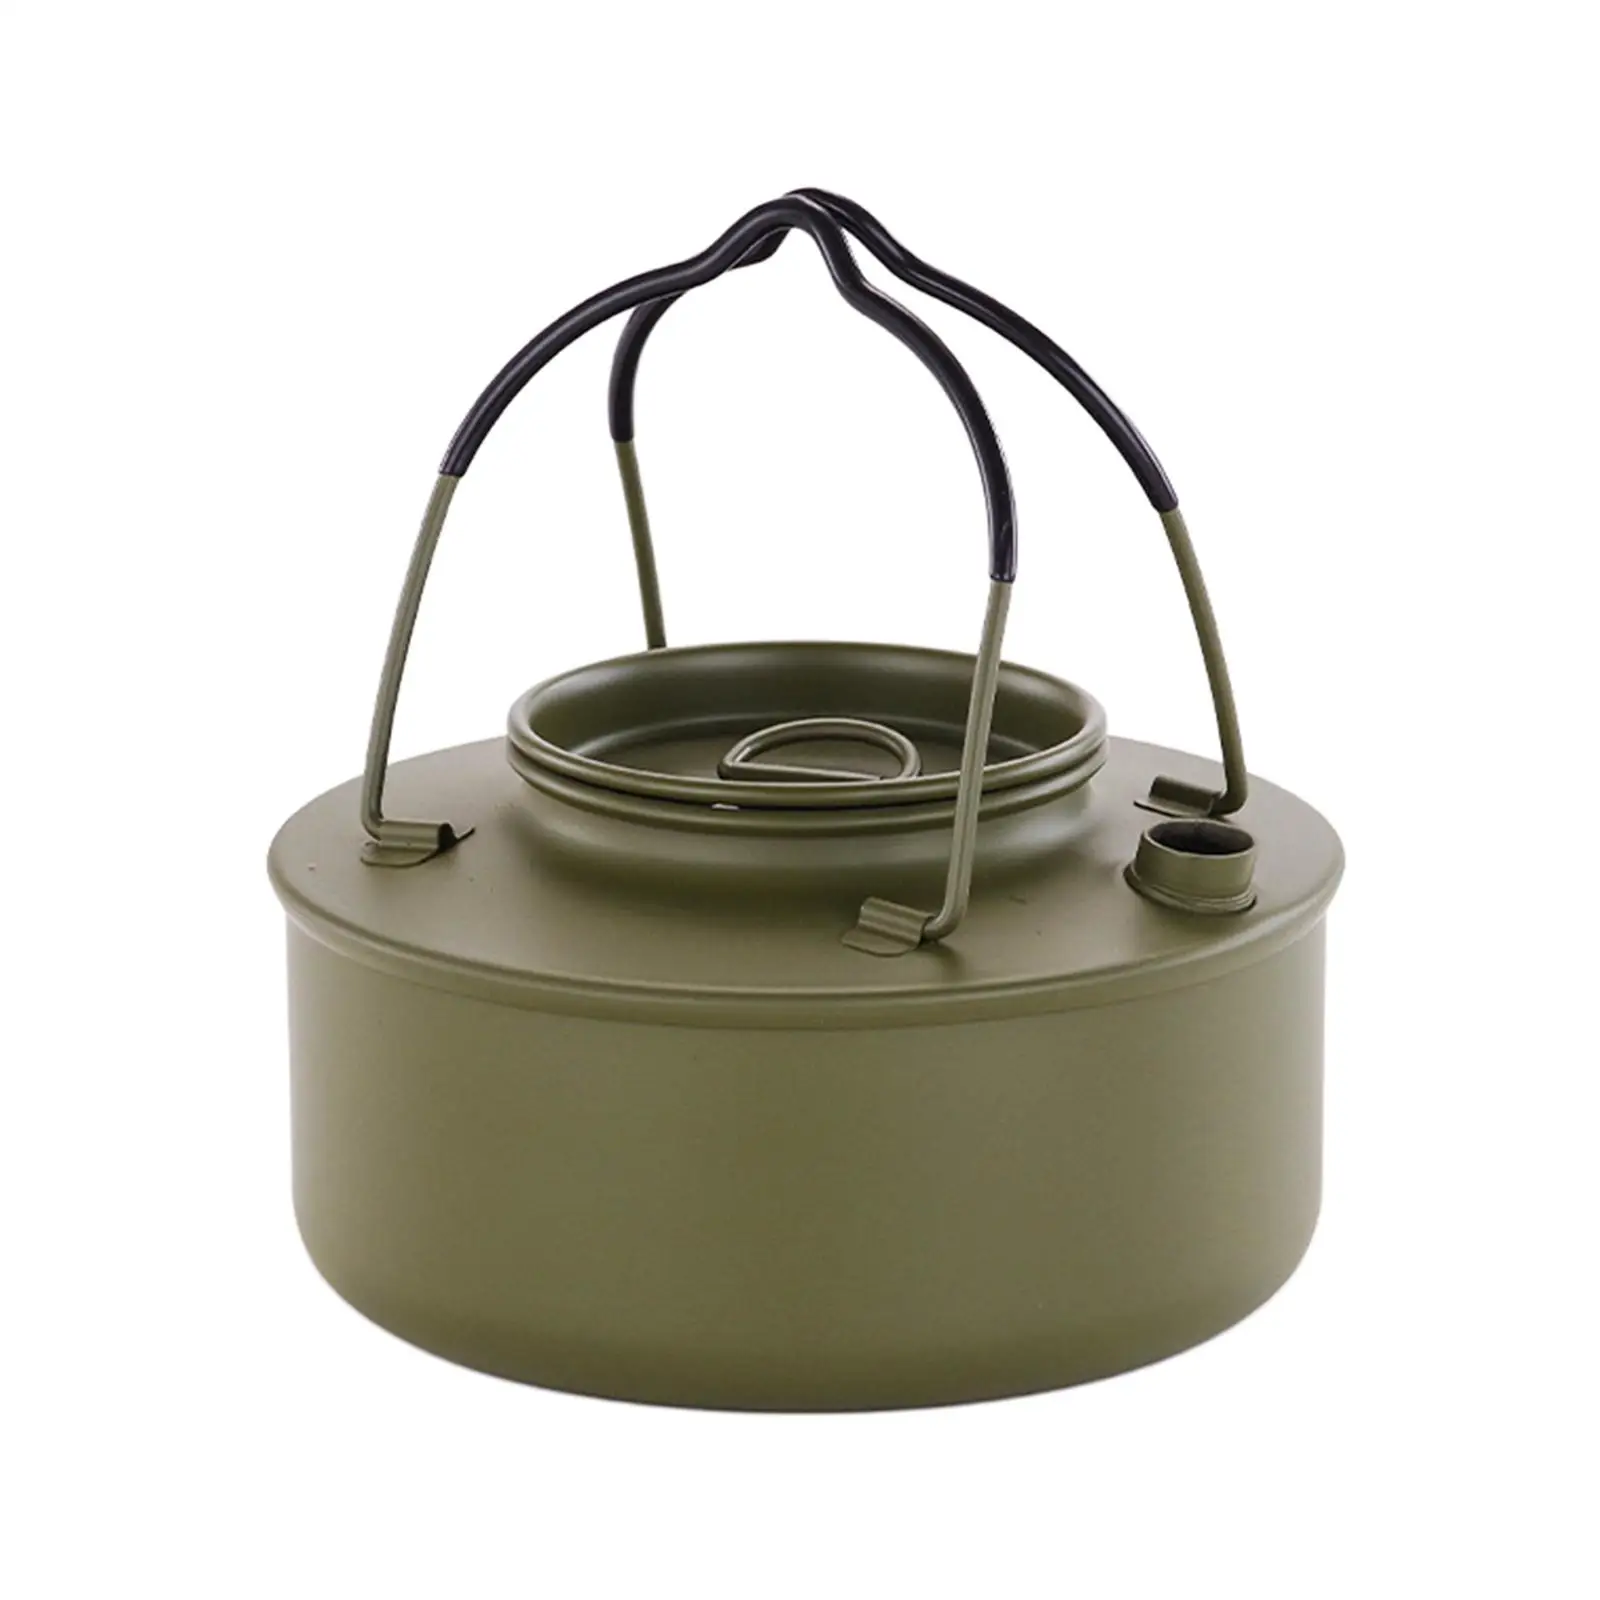 Water Boiler Teapot Camping Water Kettle for Camp Backpacking Mountaineering